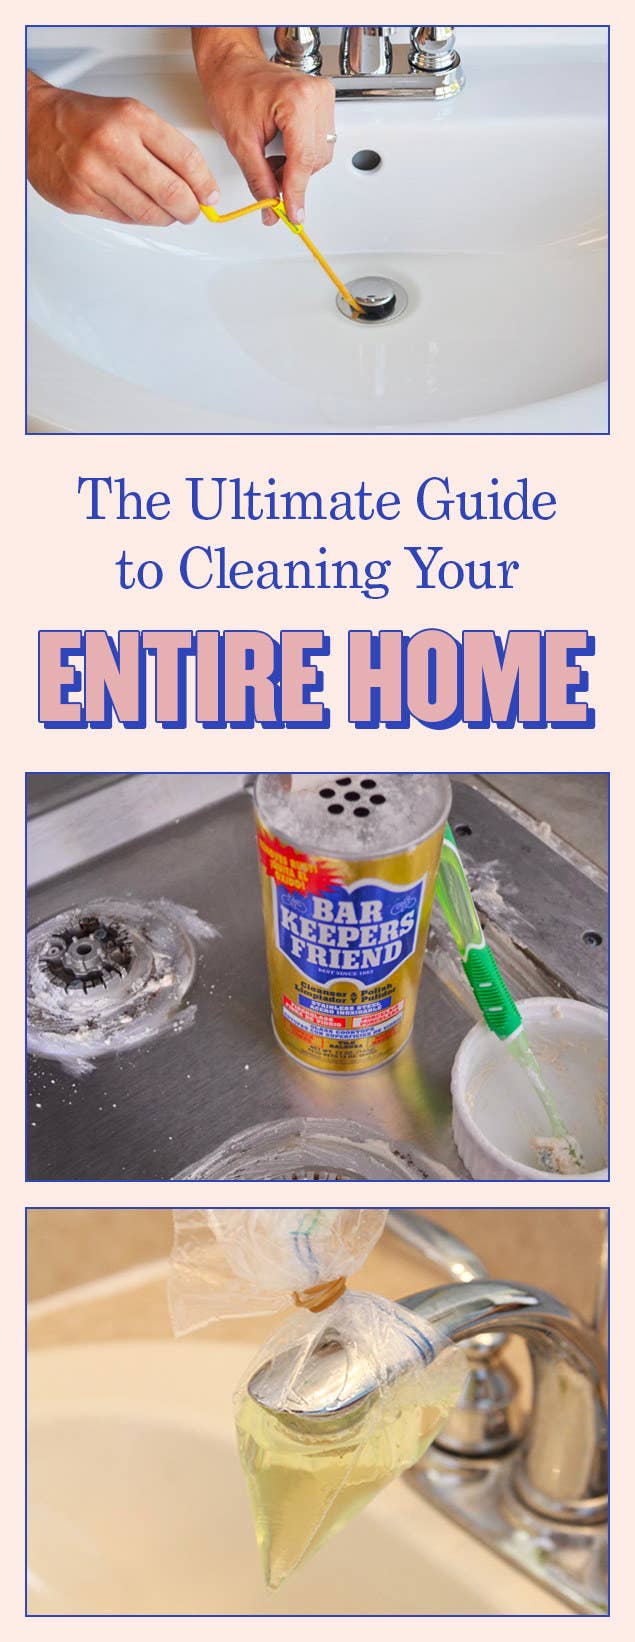 The Ultimate Guide to Cleaning Your Bathroom